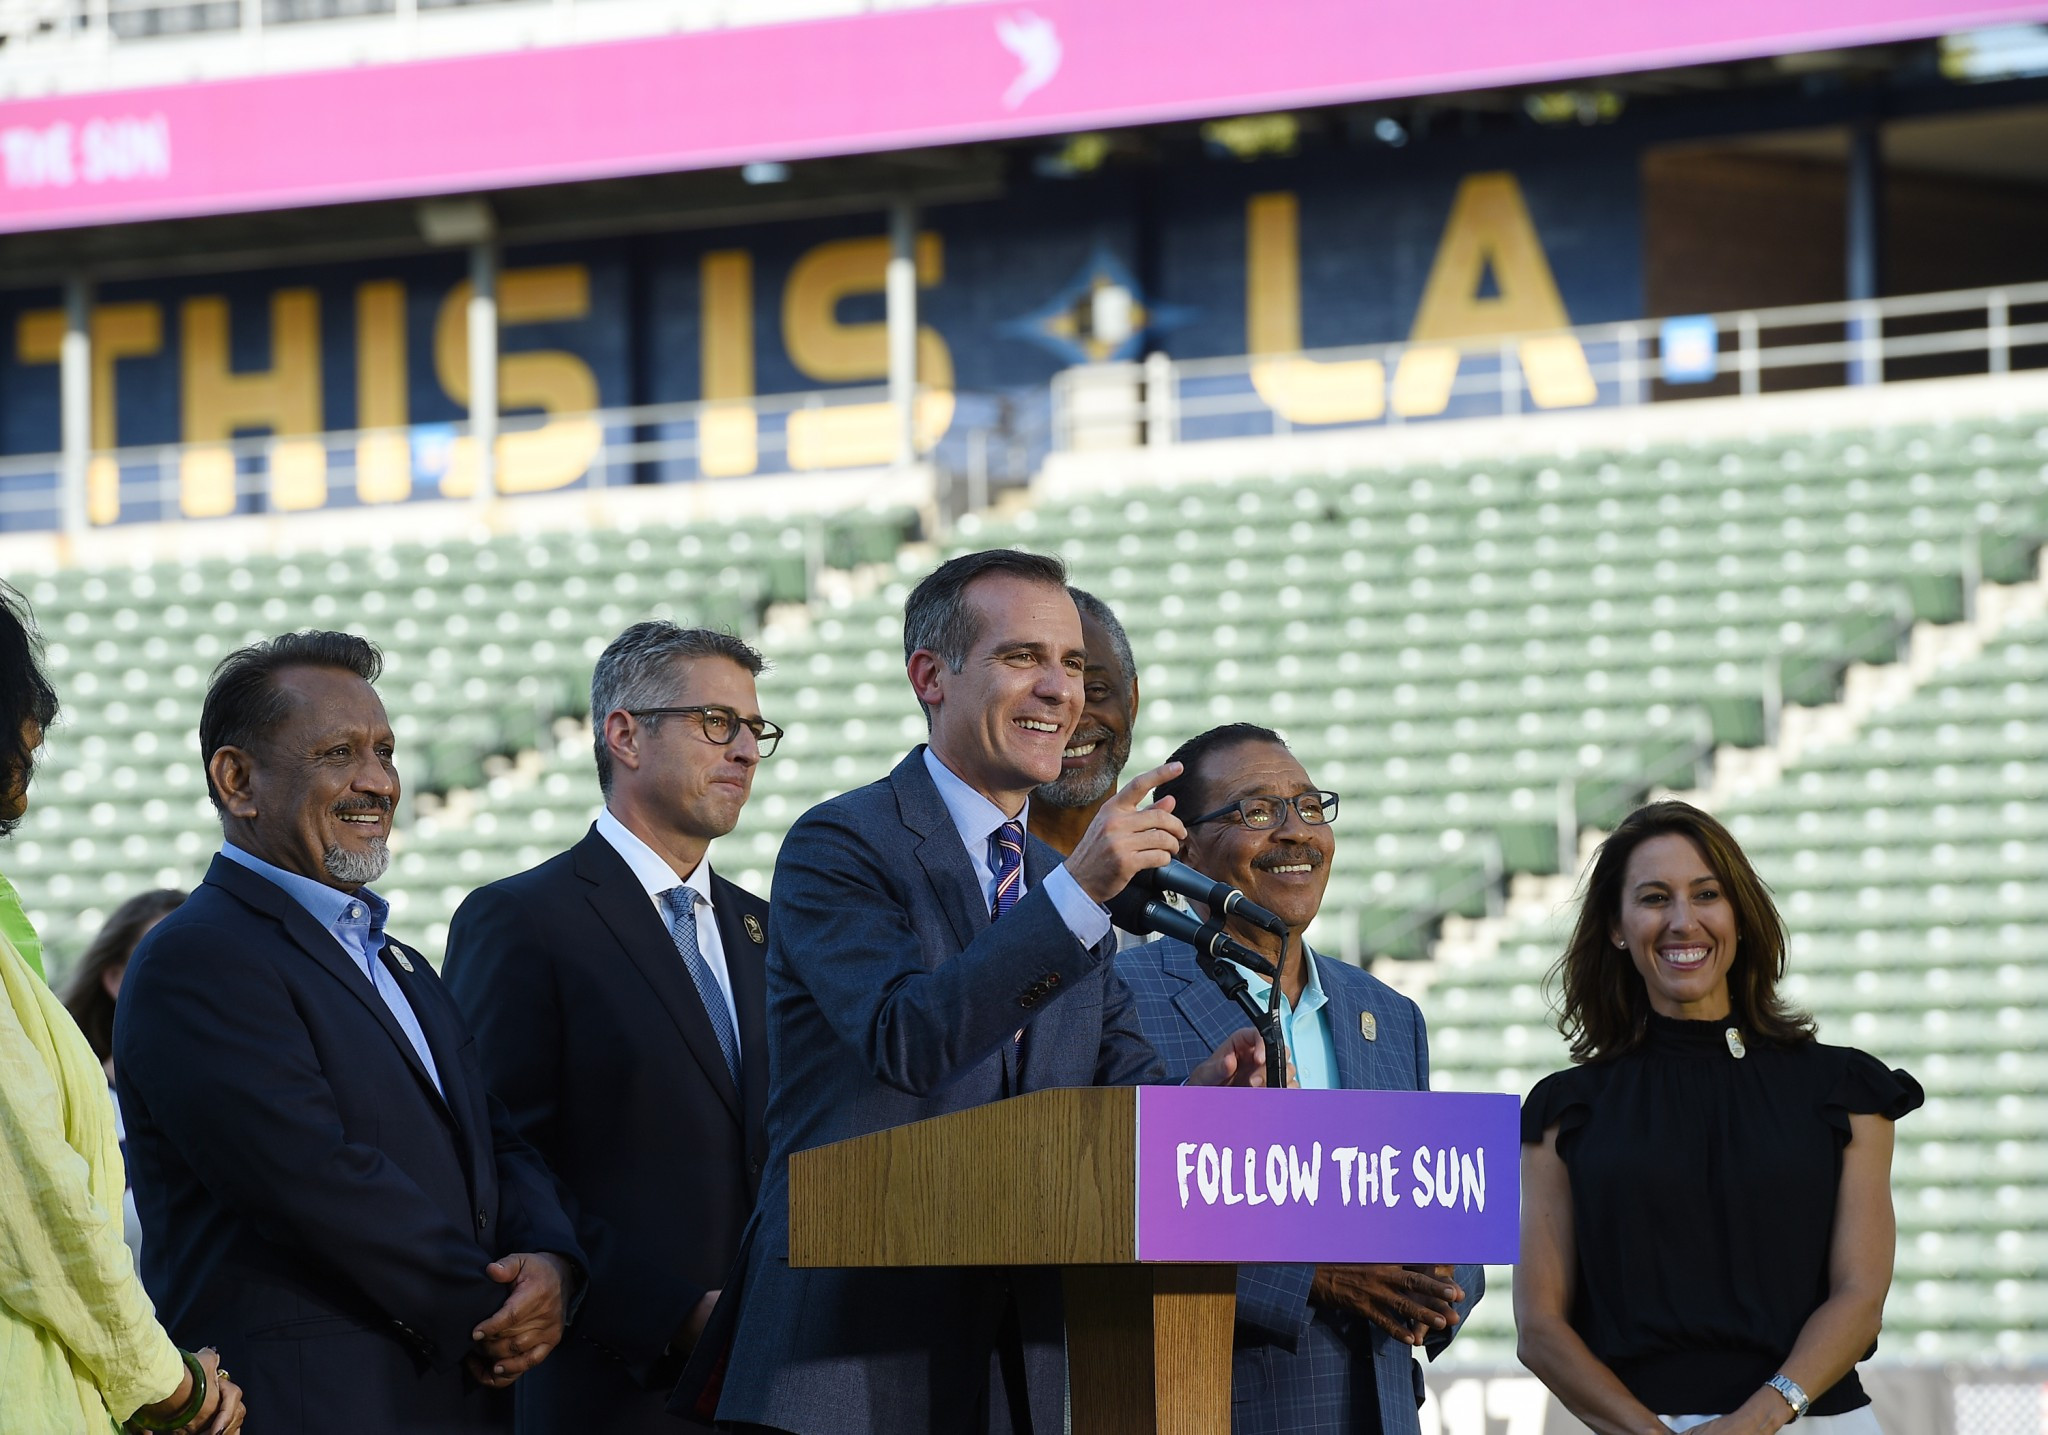 Los Angeles 2028 is calling for support from local citizens at tomorrow’s meeting of the City Council Ad Hoc Olympic Committee, which will consider the bid for the Games in 11 years’ time ©Getty Images